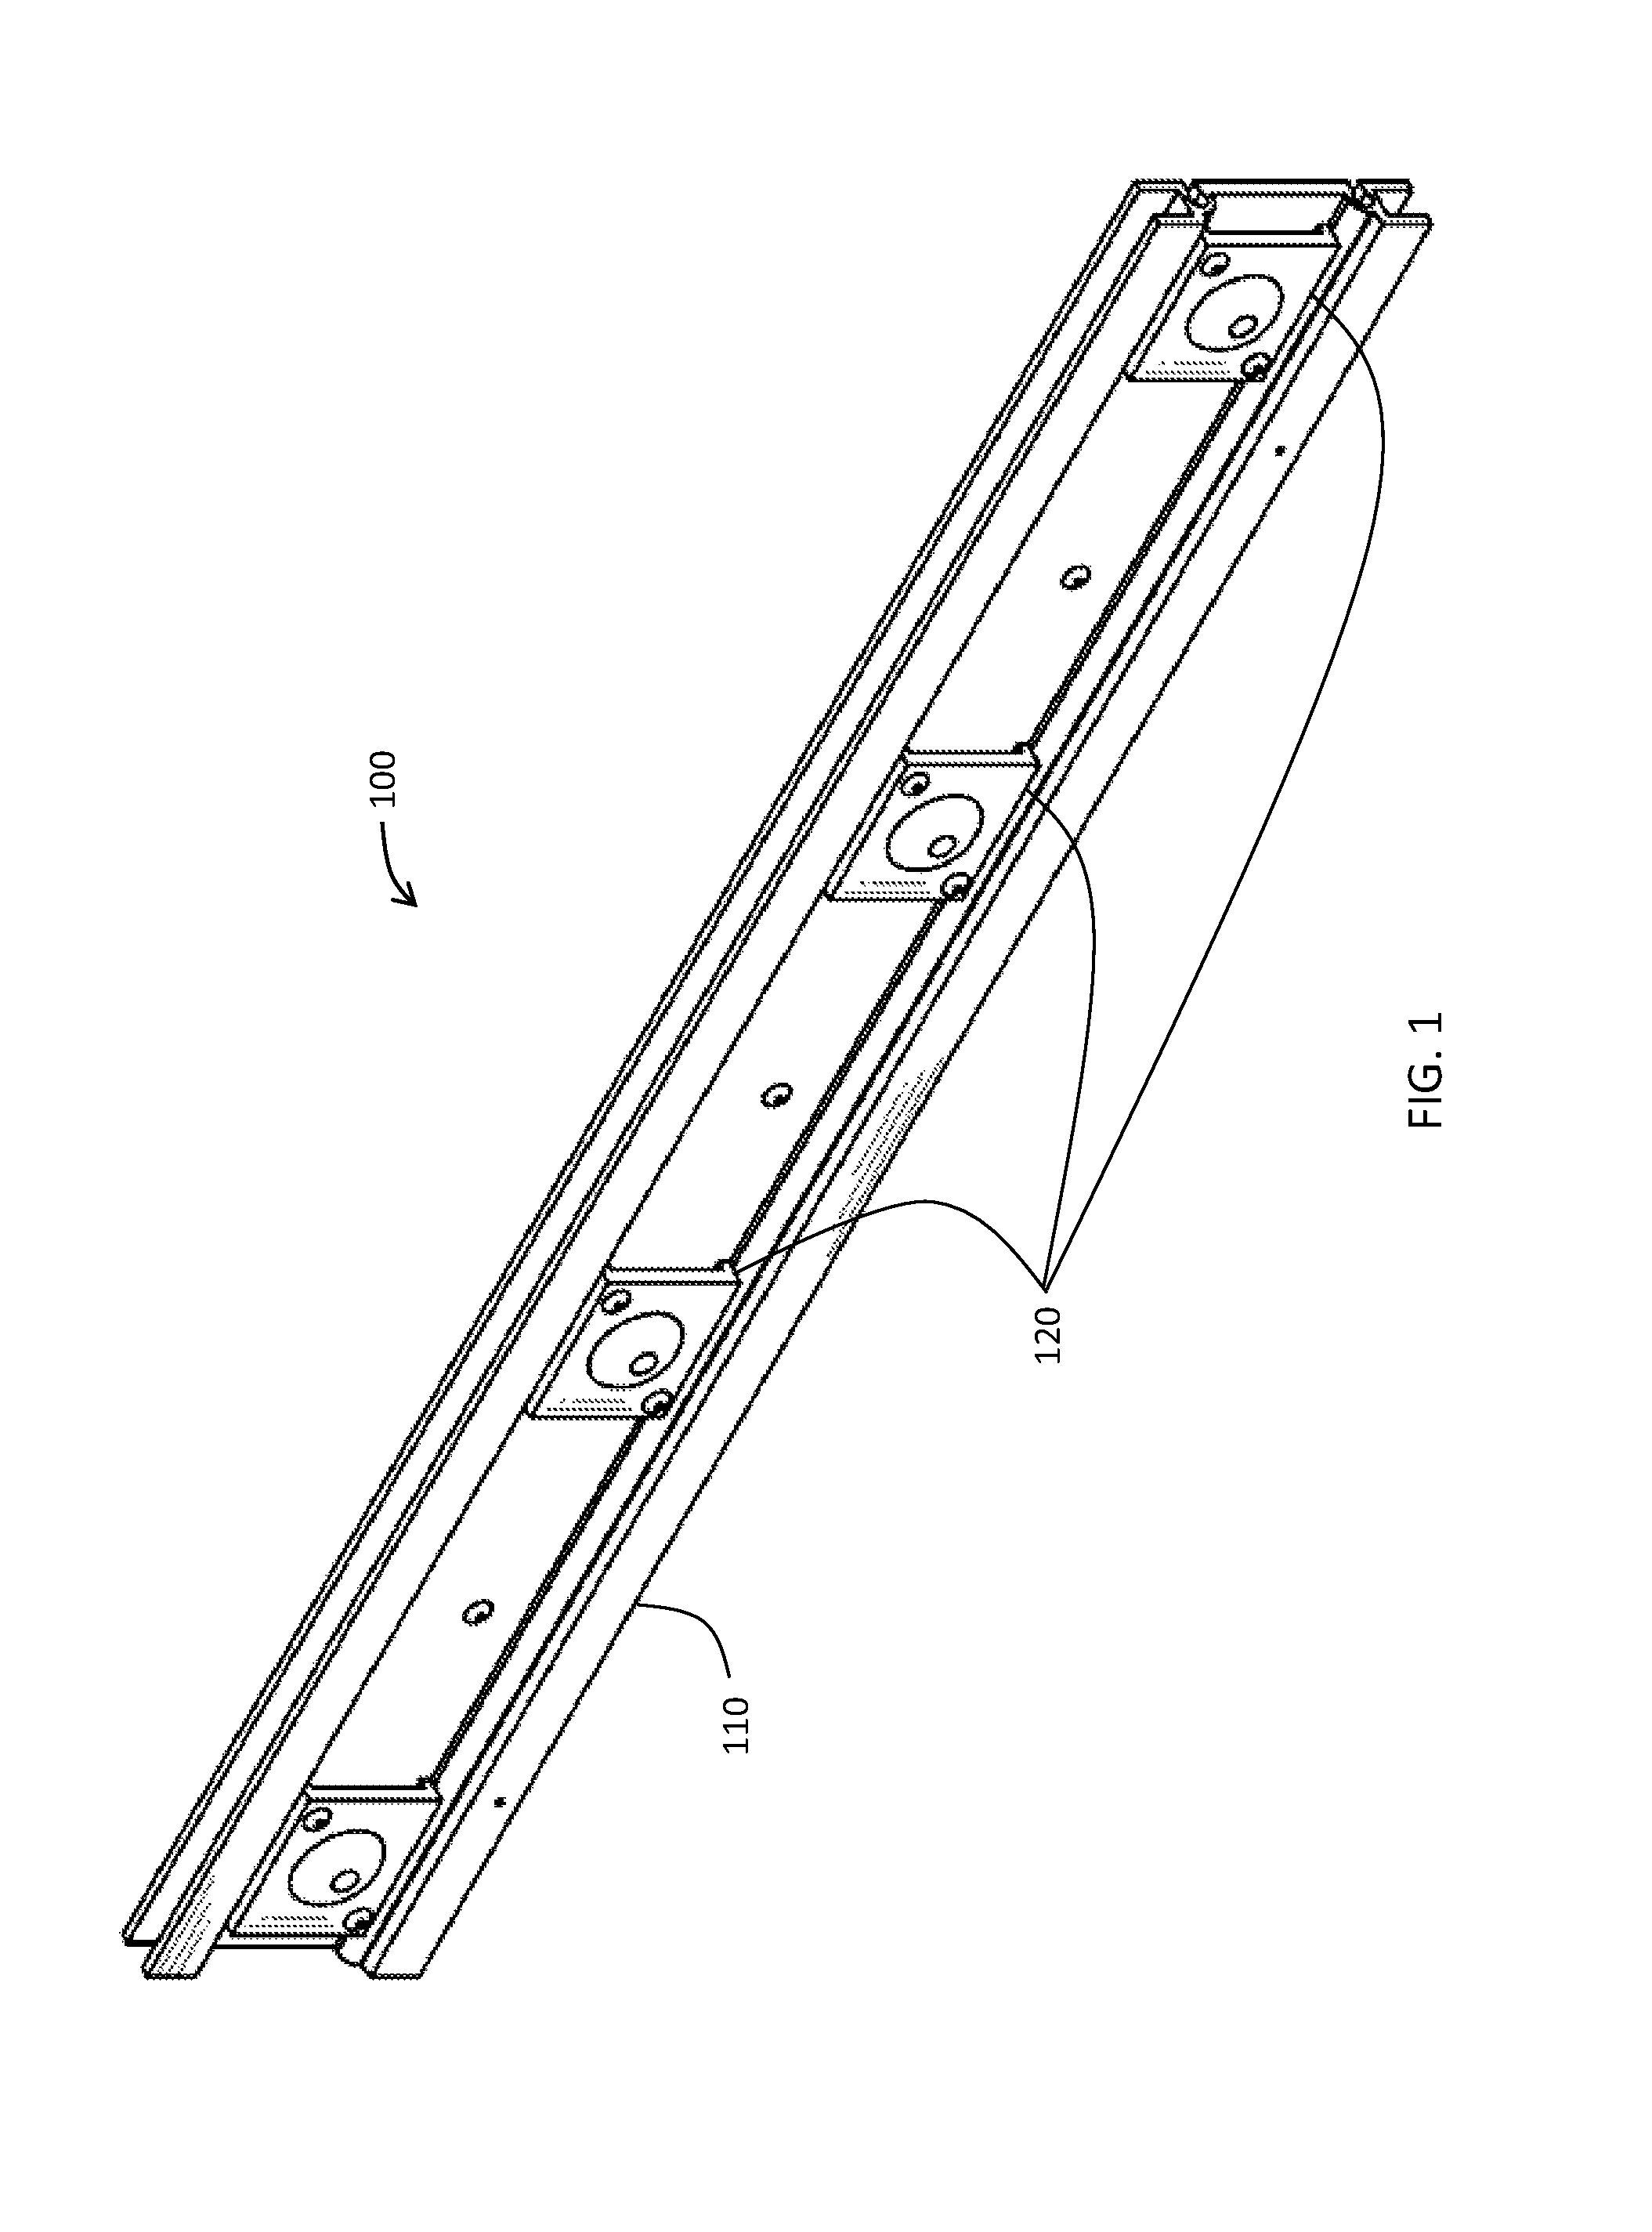 Configurable linear light assembly and associated methods